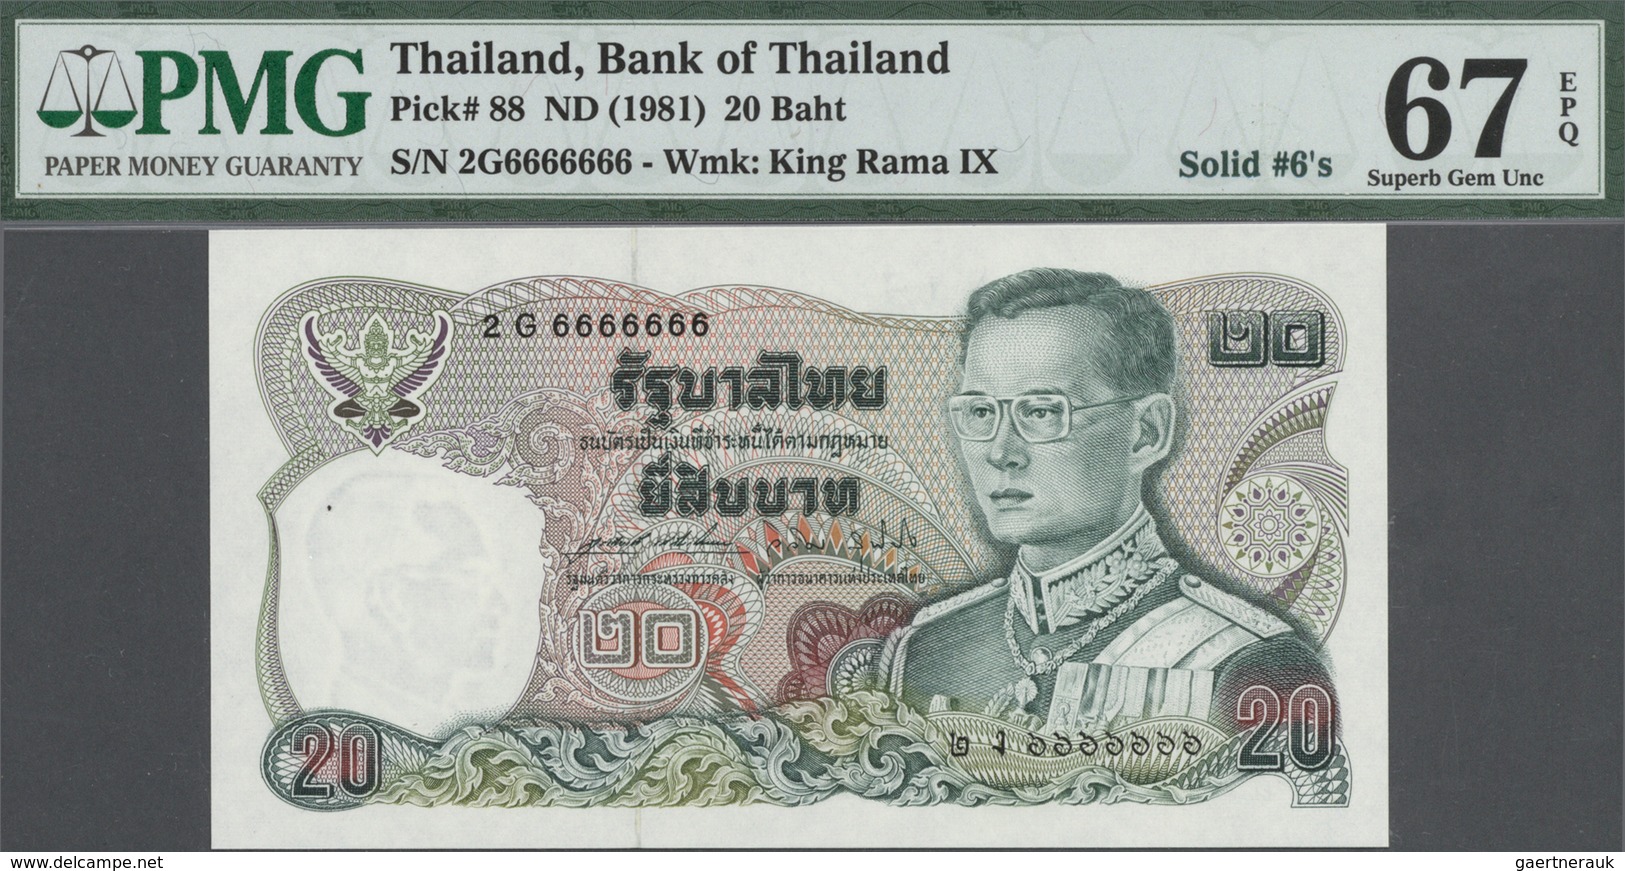 Thailand: Set Of 9 Notes 20 Baht ND(1981) P. 88 With Special Serial Numbers Containing: 5G3333333, 7 - Thailand